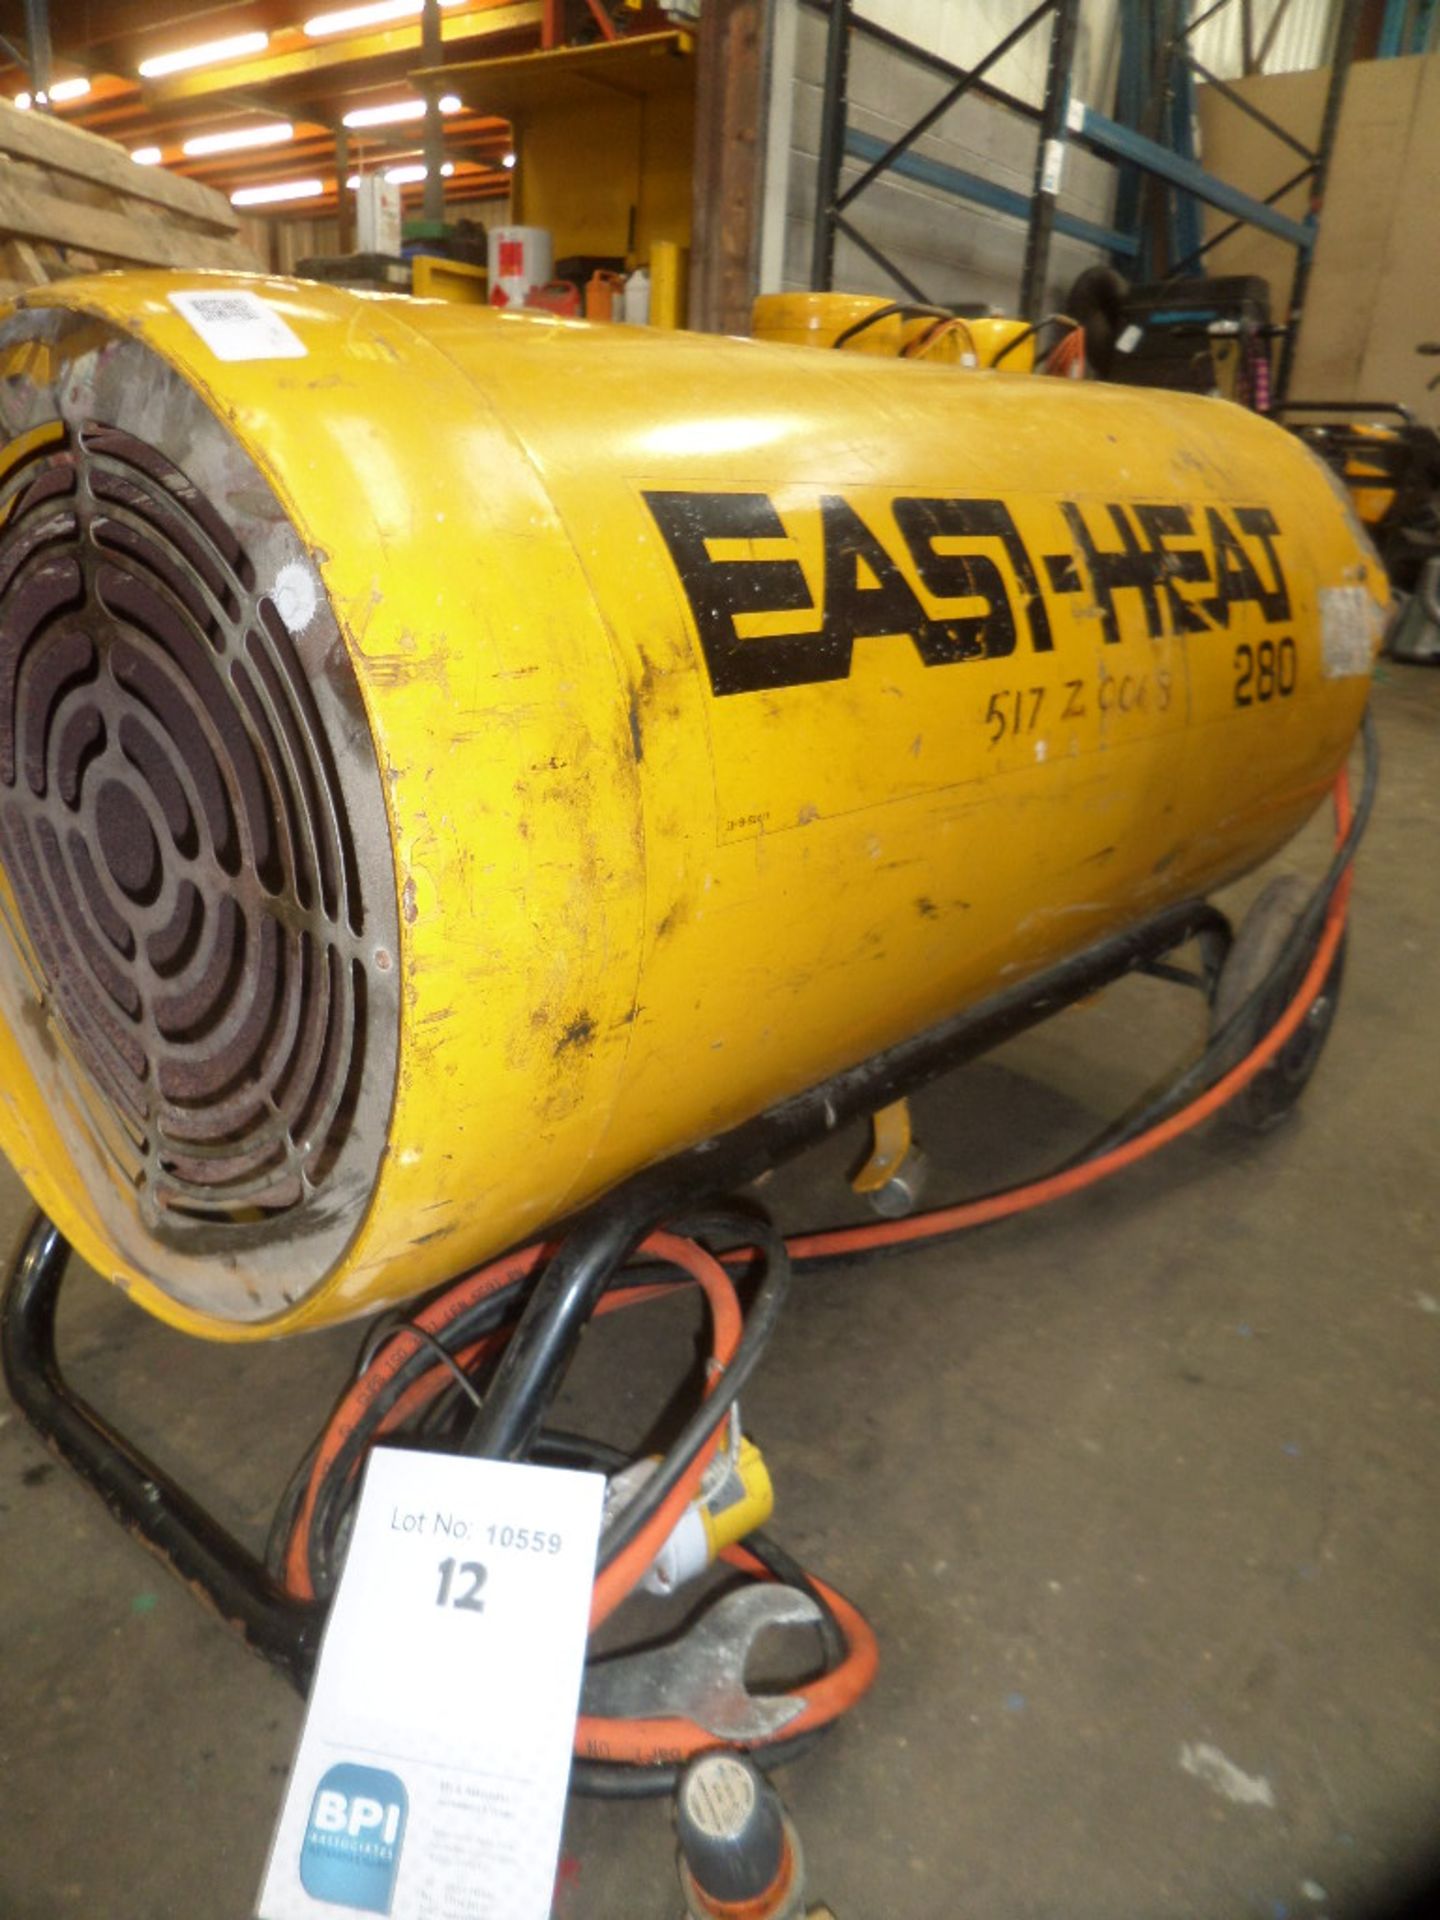 EASI HEAT 280 {017827} BLOWER HEATER 260000 BTU - GAS 110v 16amp connection and is LPG gas. tested a